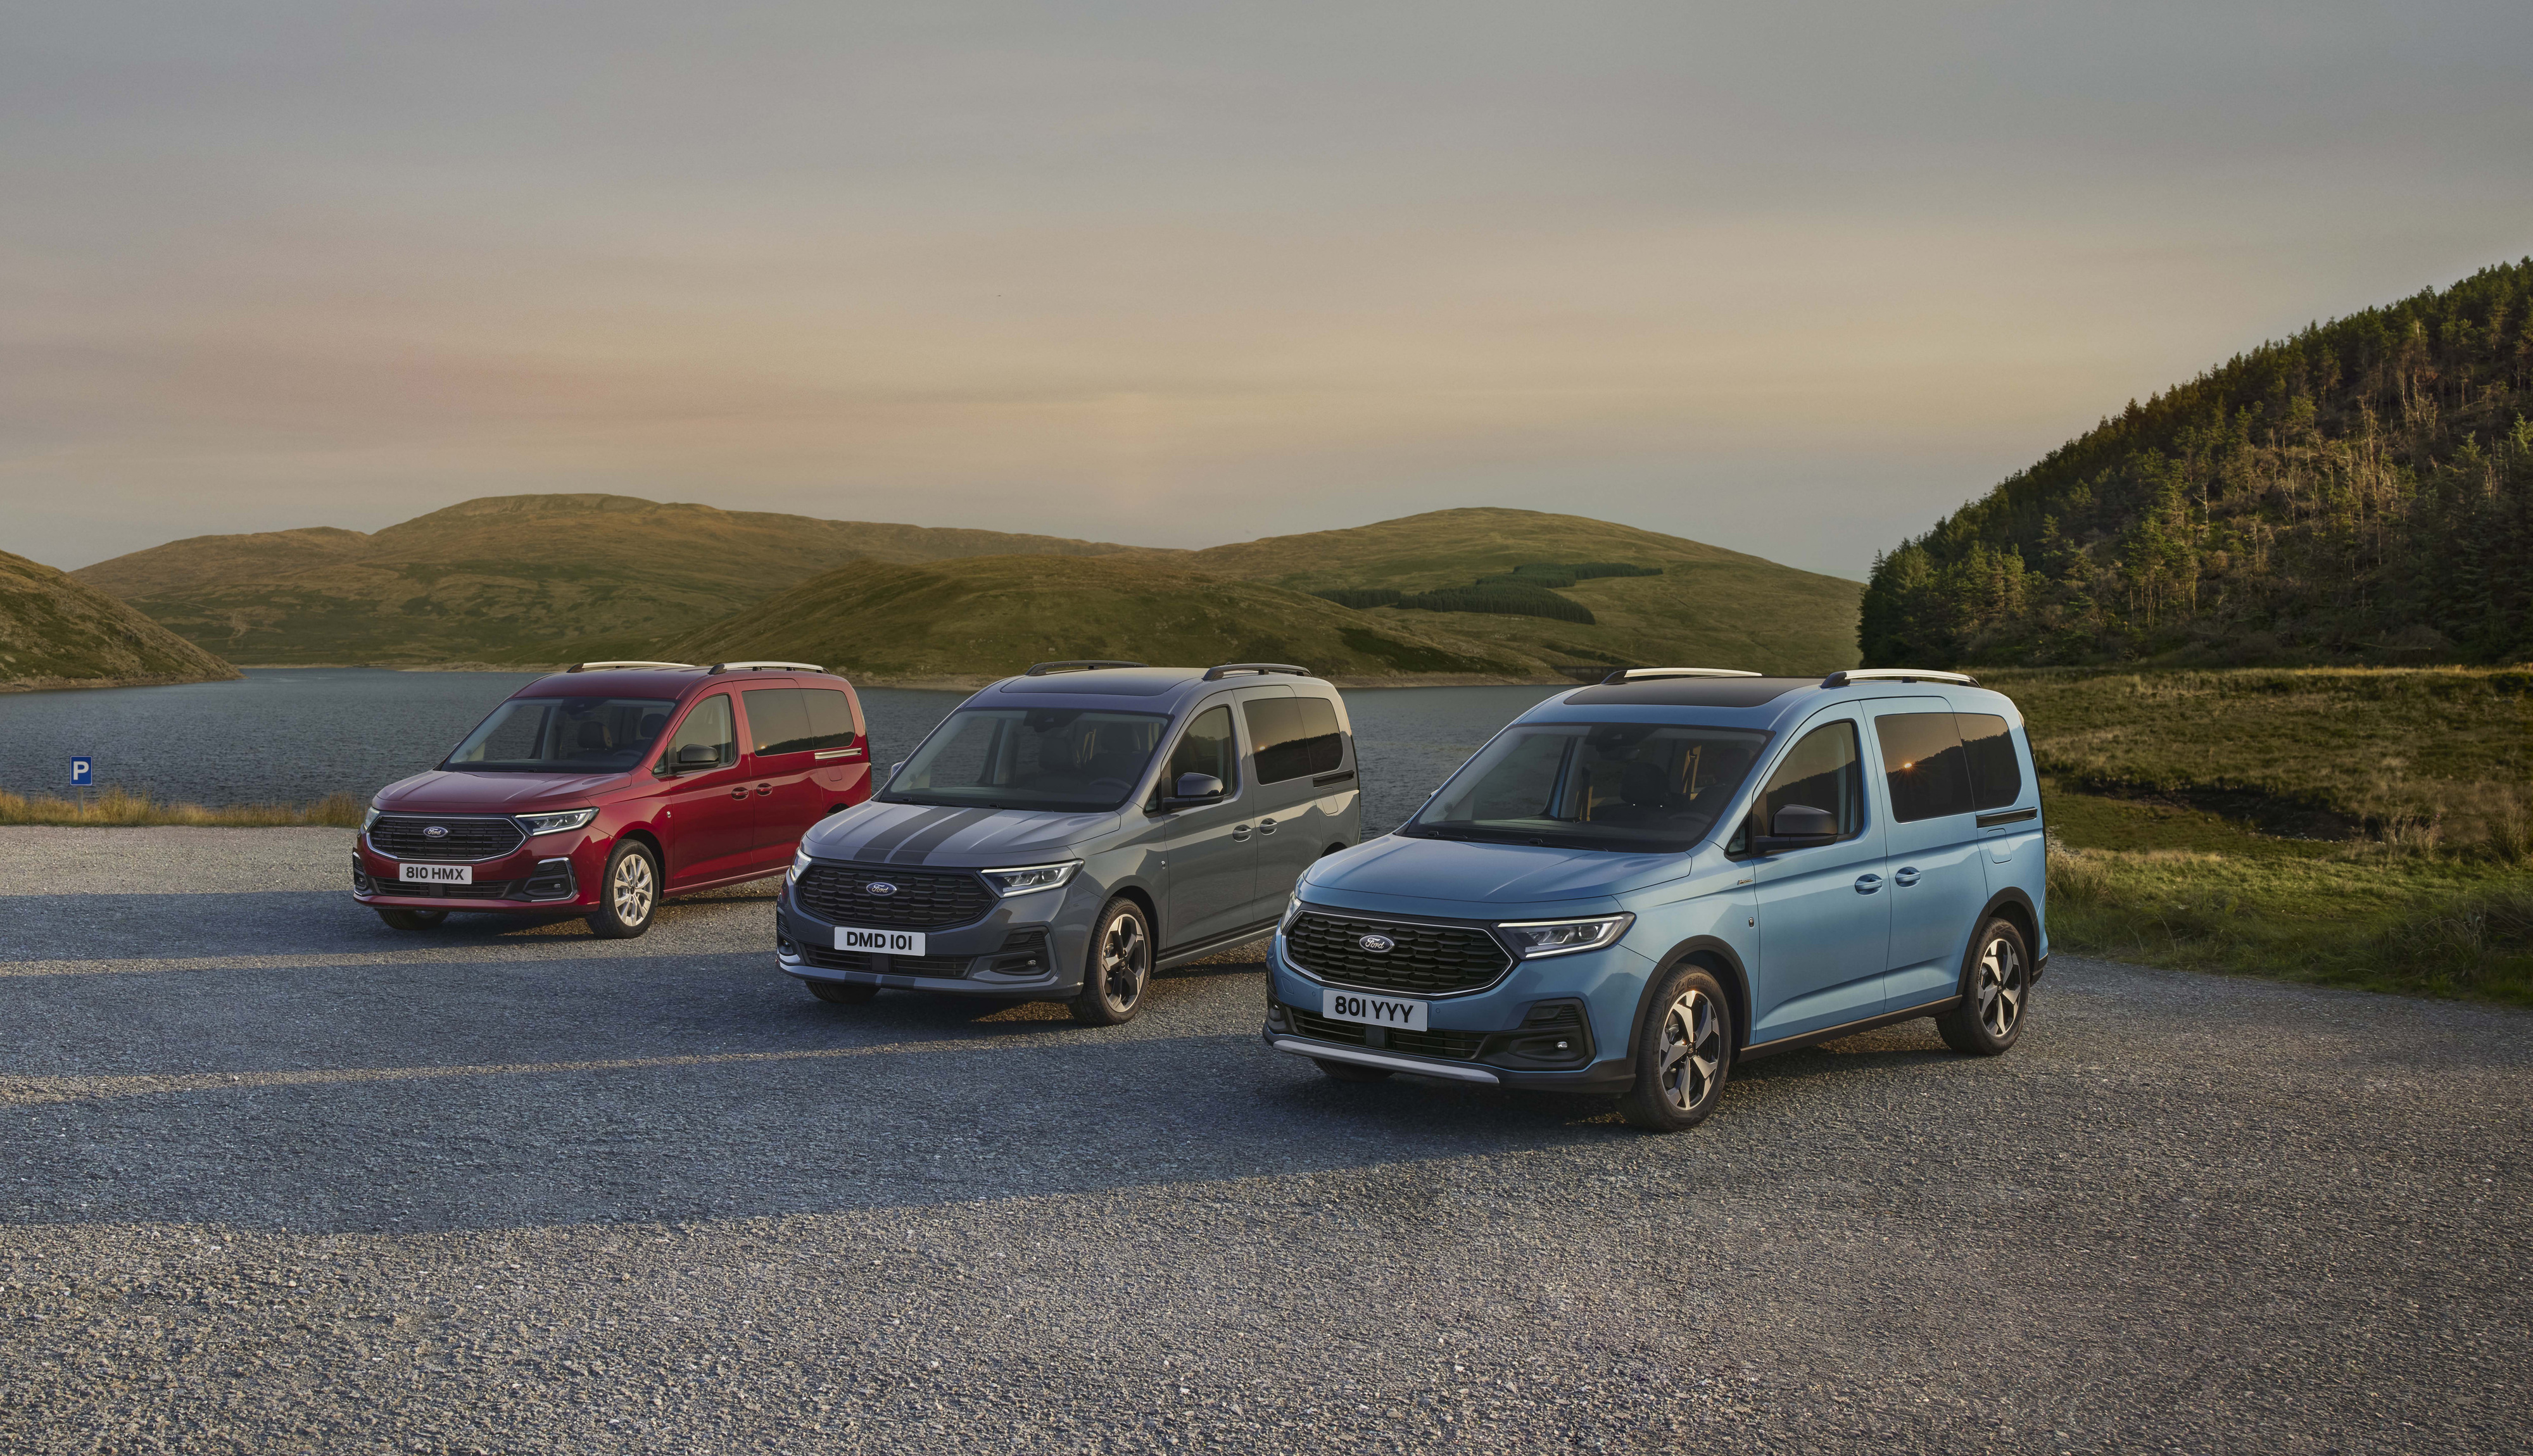 FORD INTRODUCES ACTIVE RANGE TO TOURNEO AND TRANSIT CONNECT WITH FRESH  STYLE AND CAPABILITY TO TACKLE OUTDOOR ADVENTURES, Great Britain